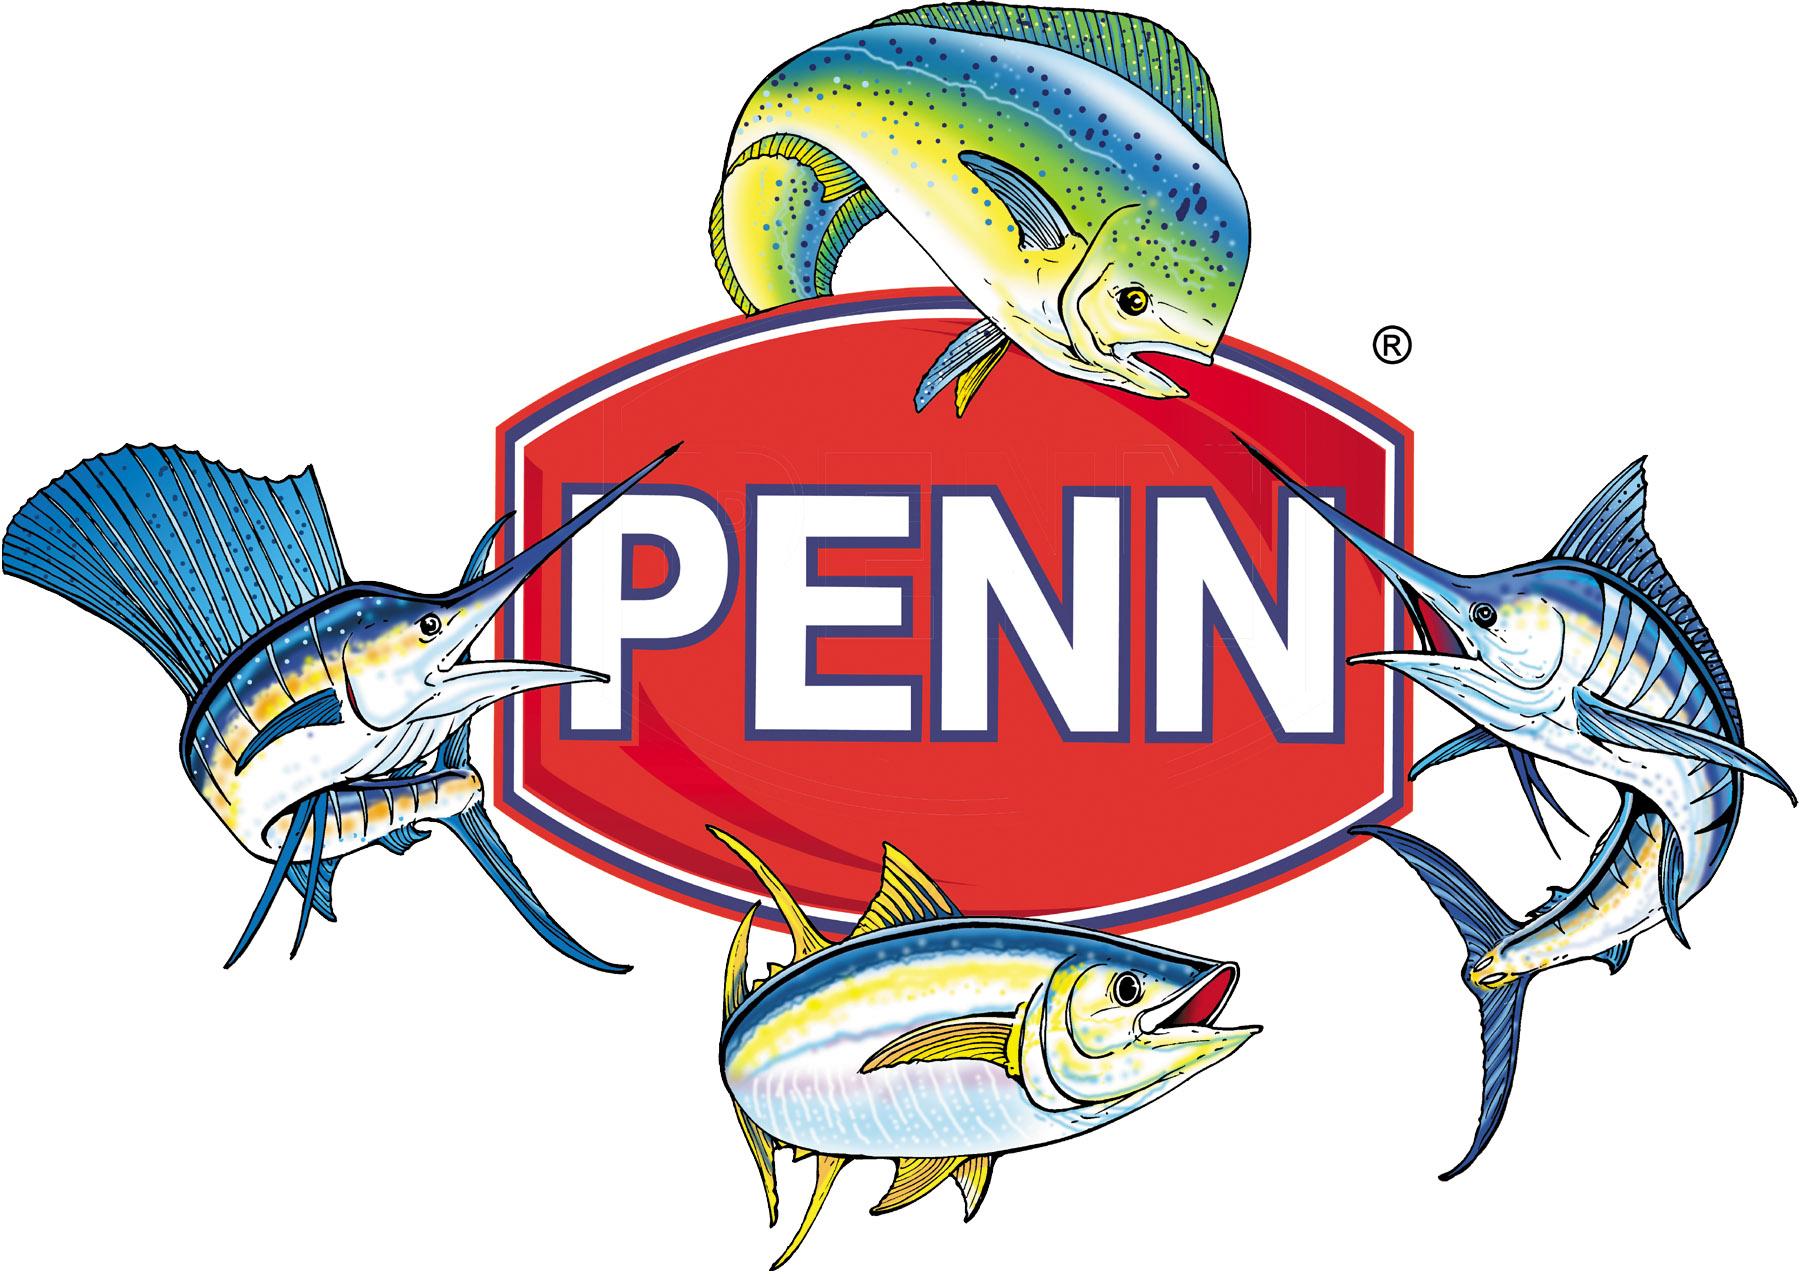 Penn Logo - Index of /catalog/store/images/pennparts/PennGraphicsDownload/Penn ...